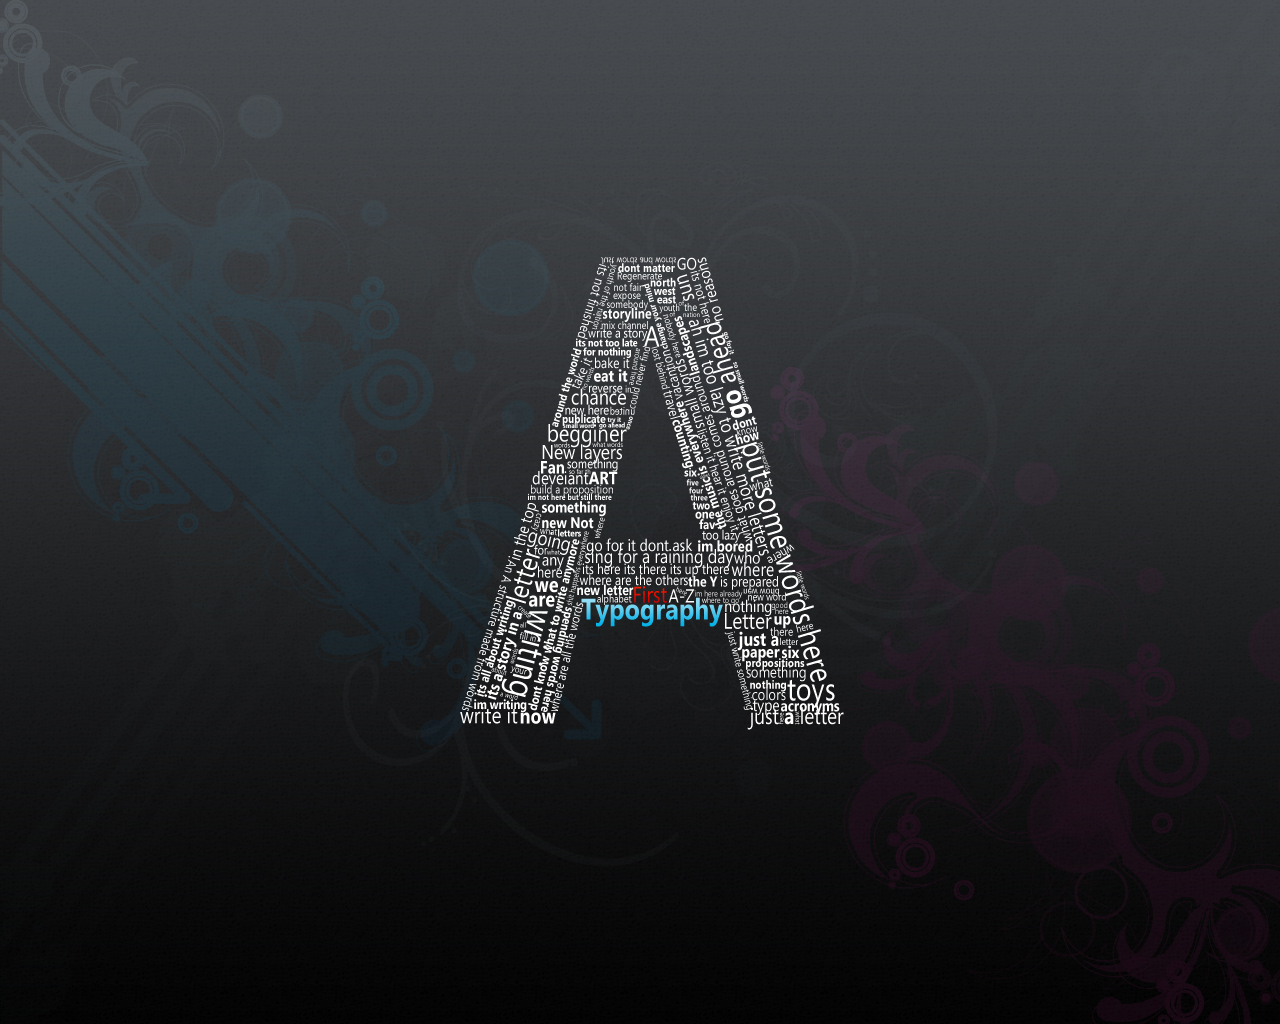 Download Typographied Letter on CrystalXPnet   Wallpapers